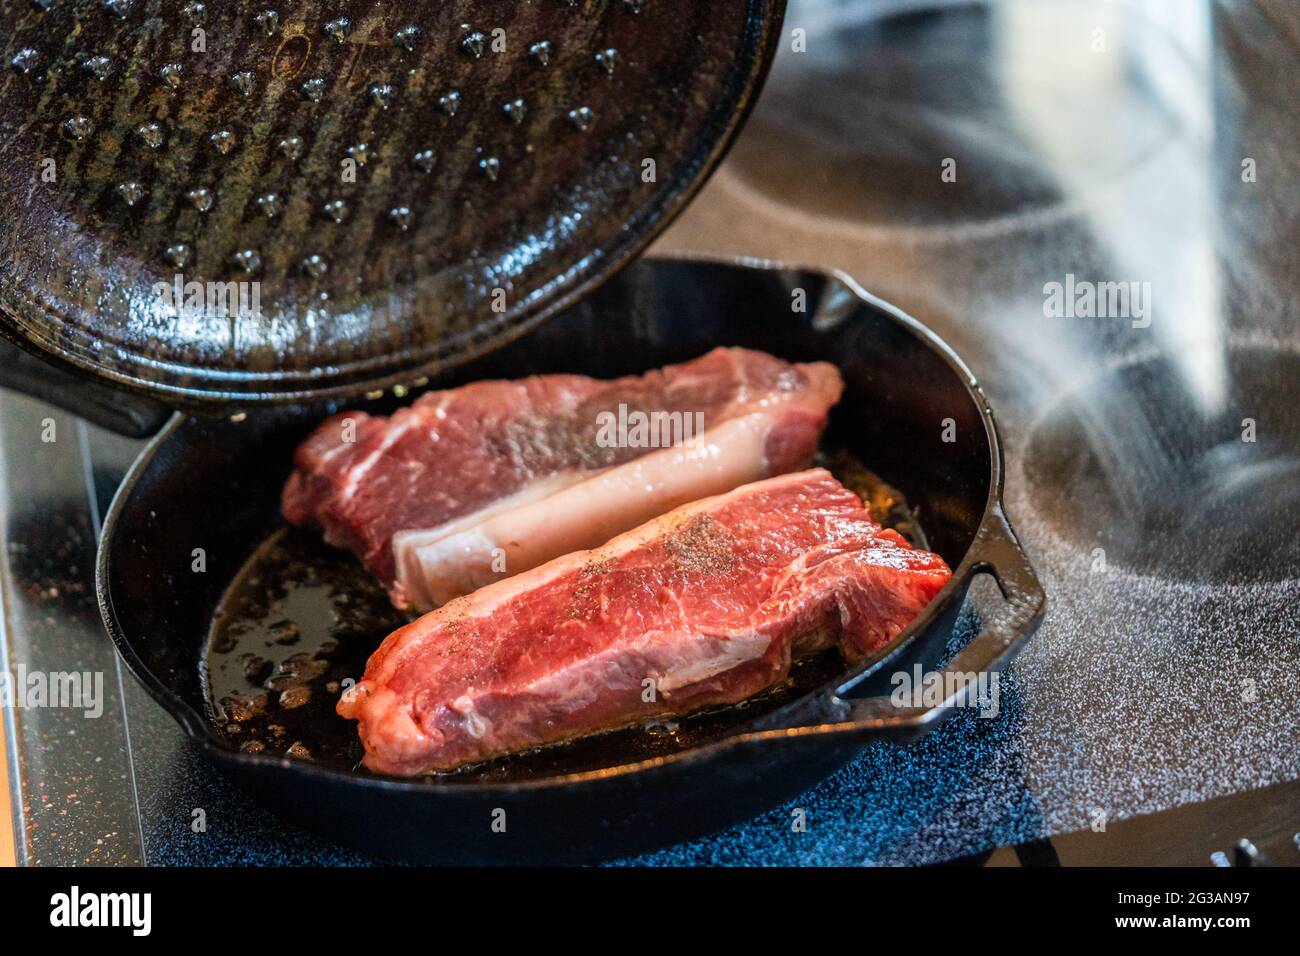 Premium Photo  Frying new york strip steak in cast iron frying pan over  the electric stove